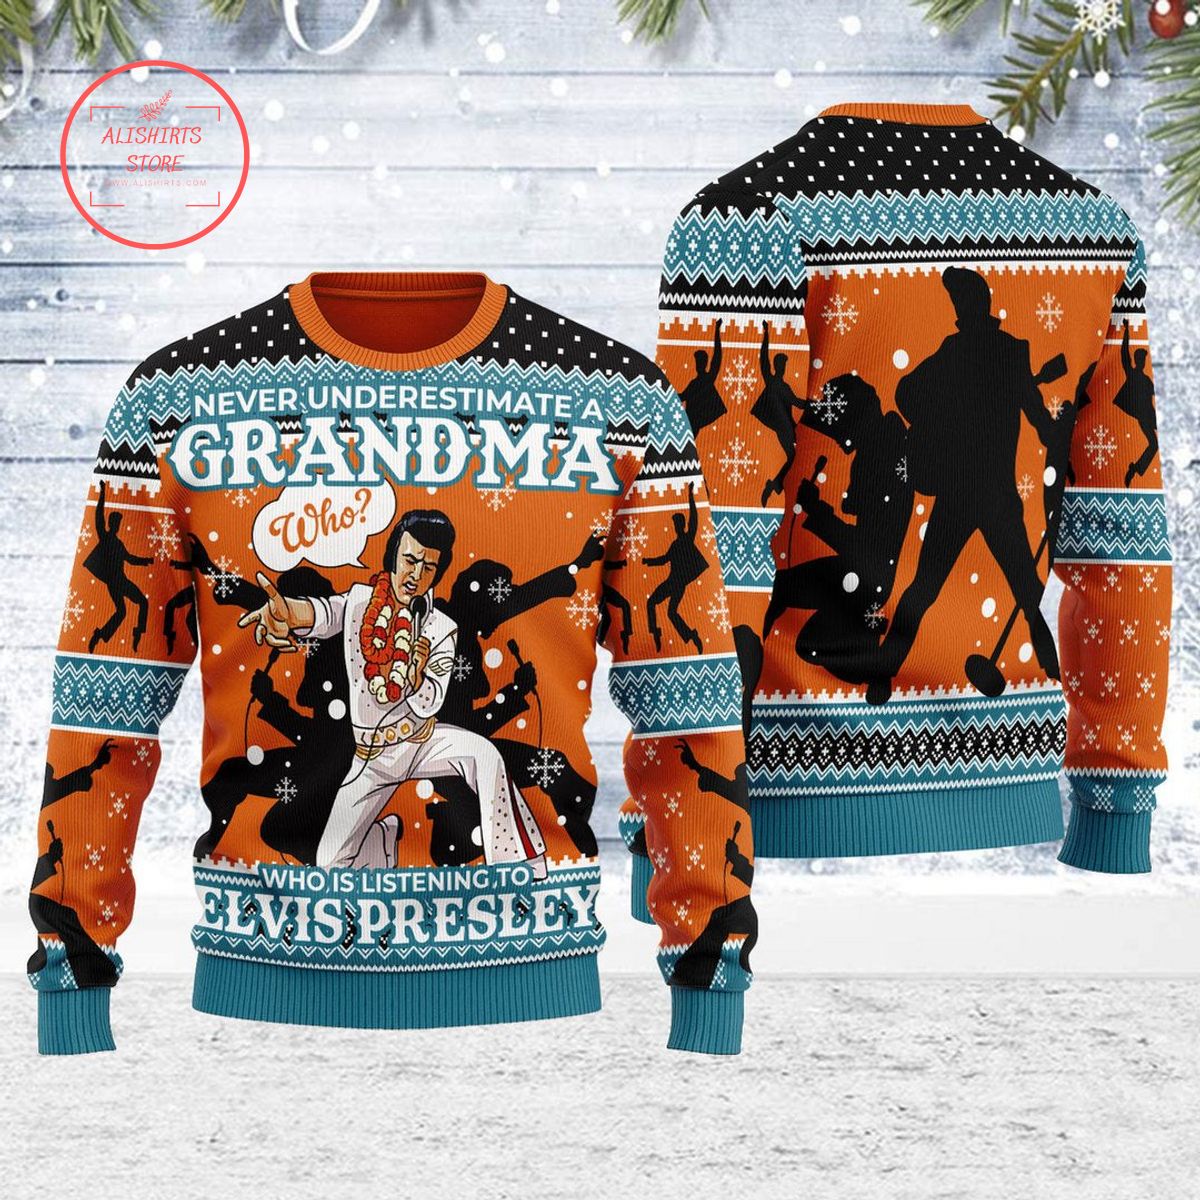 Who is Listening to Elvis Presley Christmas Ugly Sweater